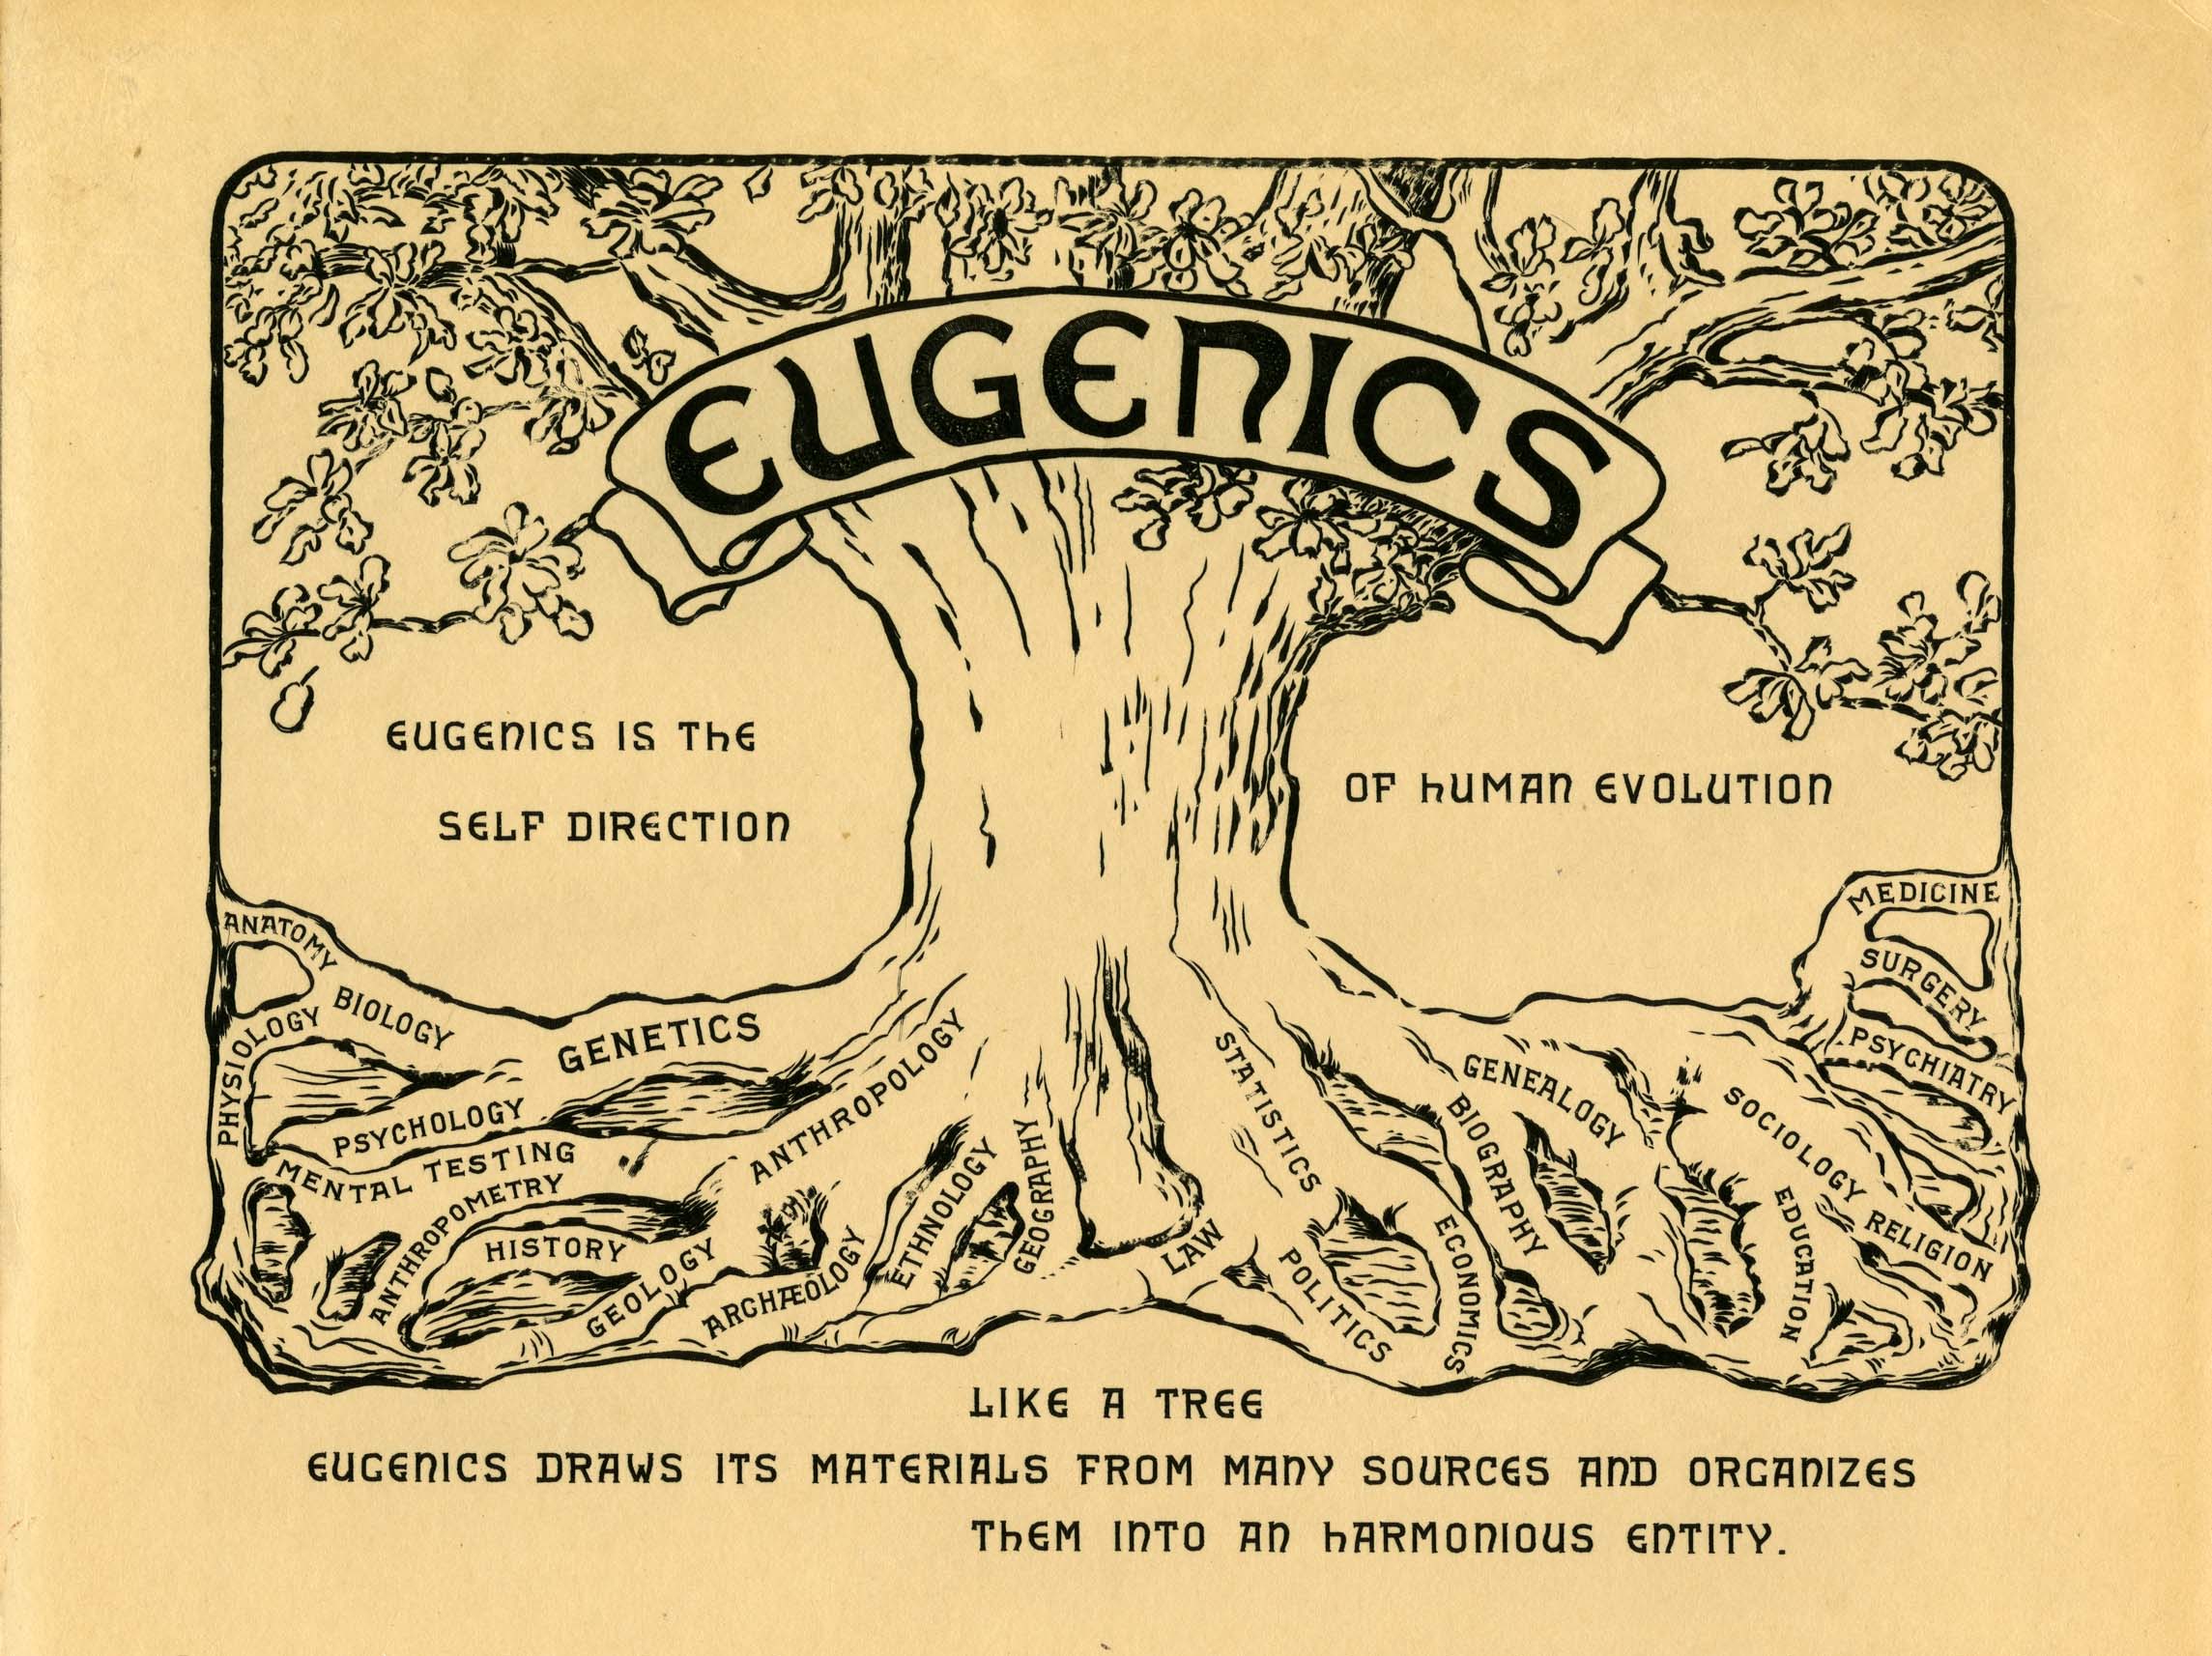 Logo from the Second International Eugenics Congress, 1921